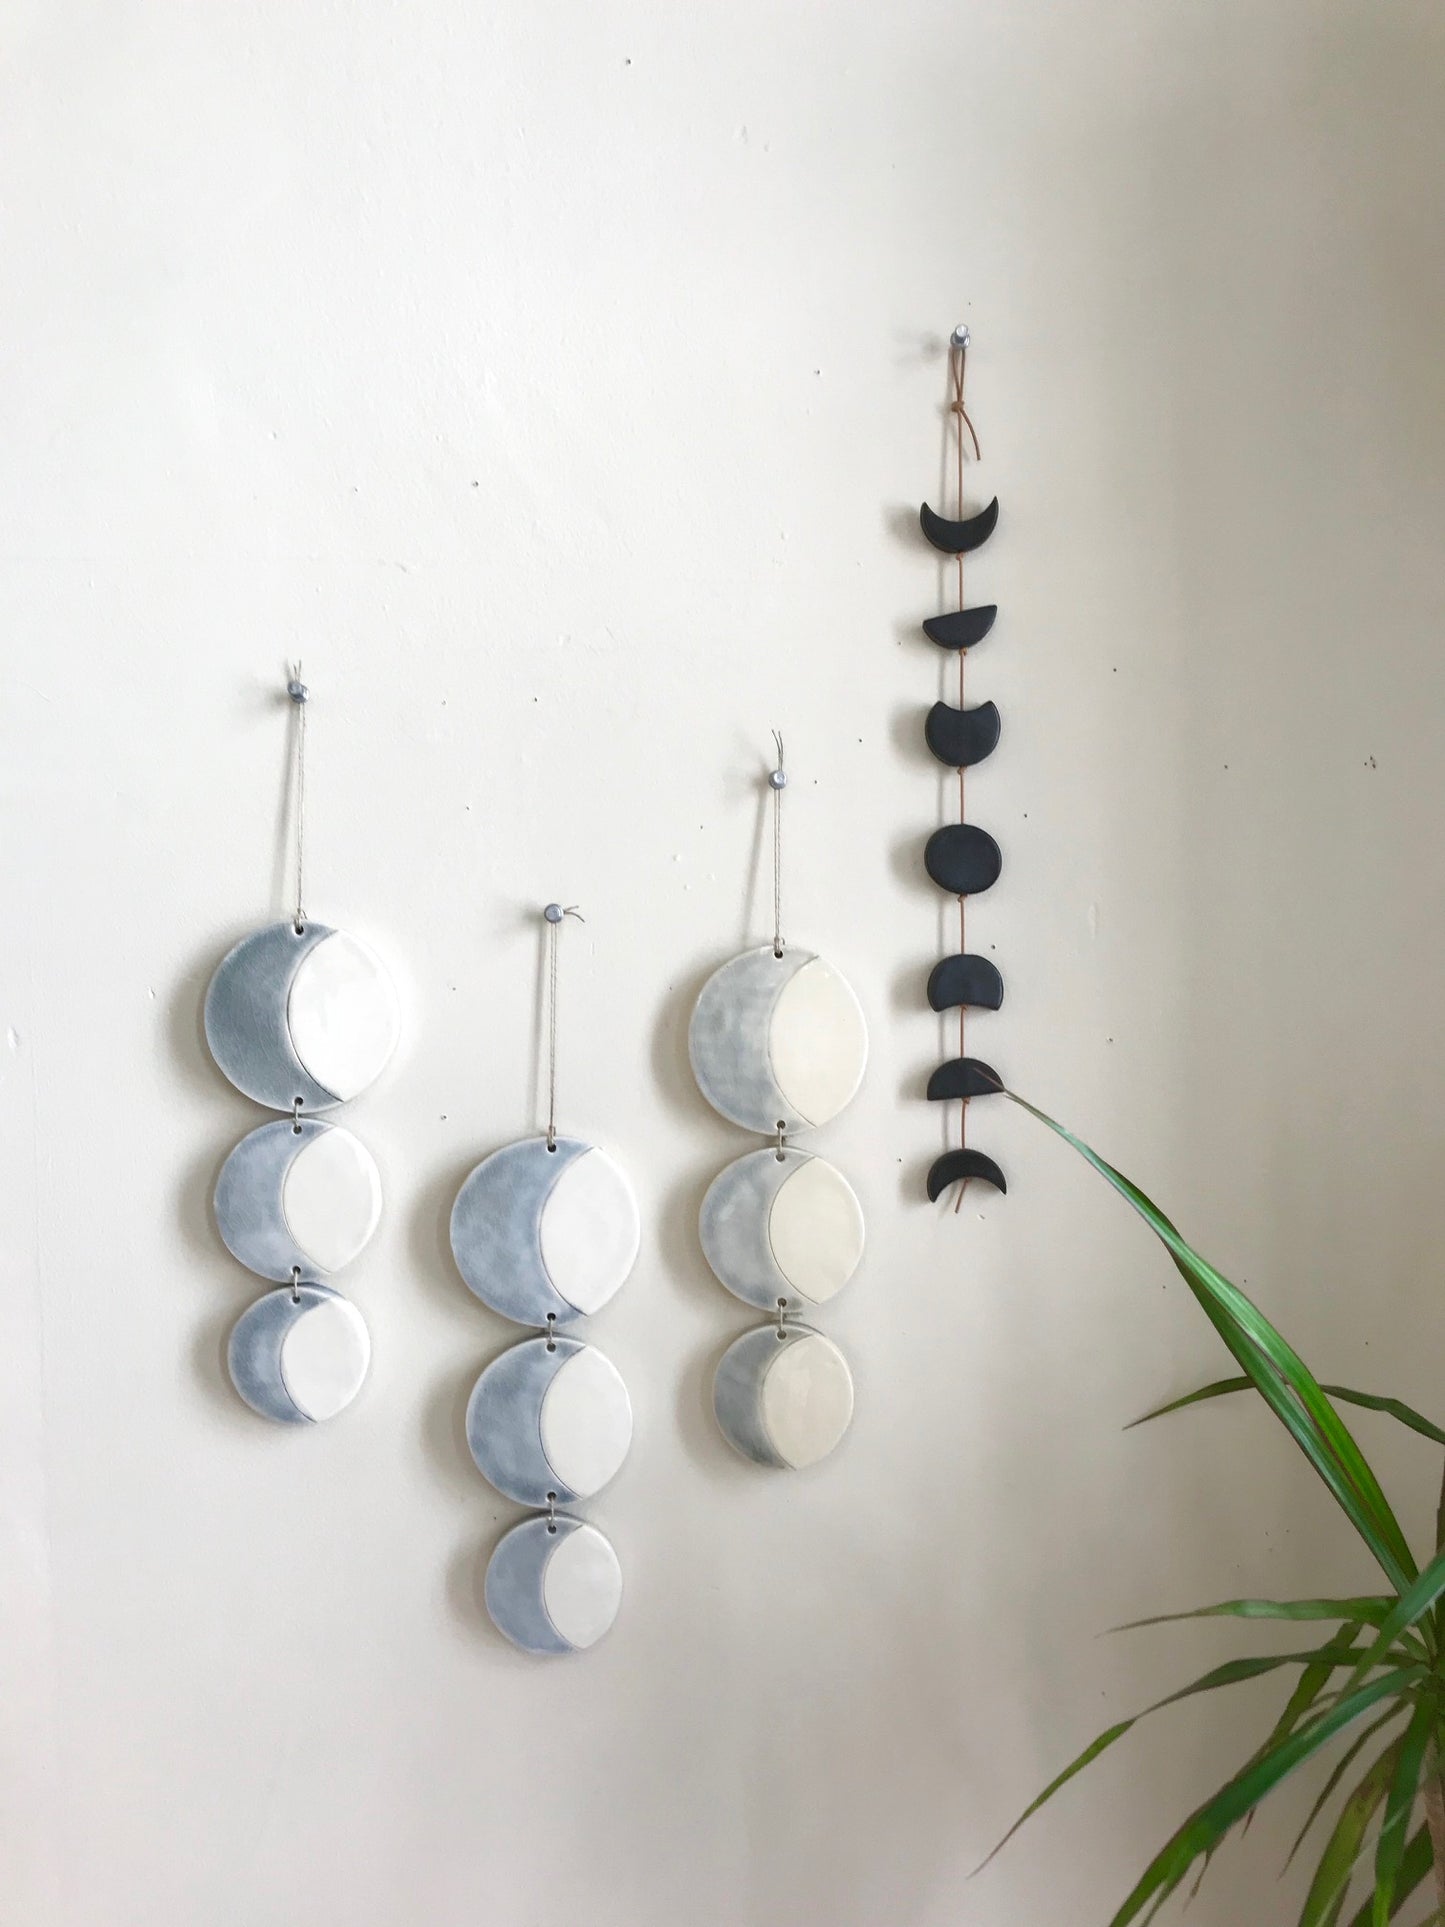 SOLD - triple silver sound of the crescent moon ceramic vertical wall piece